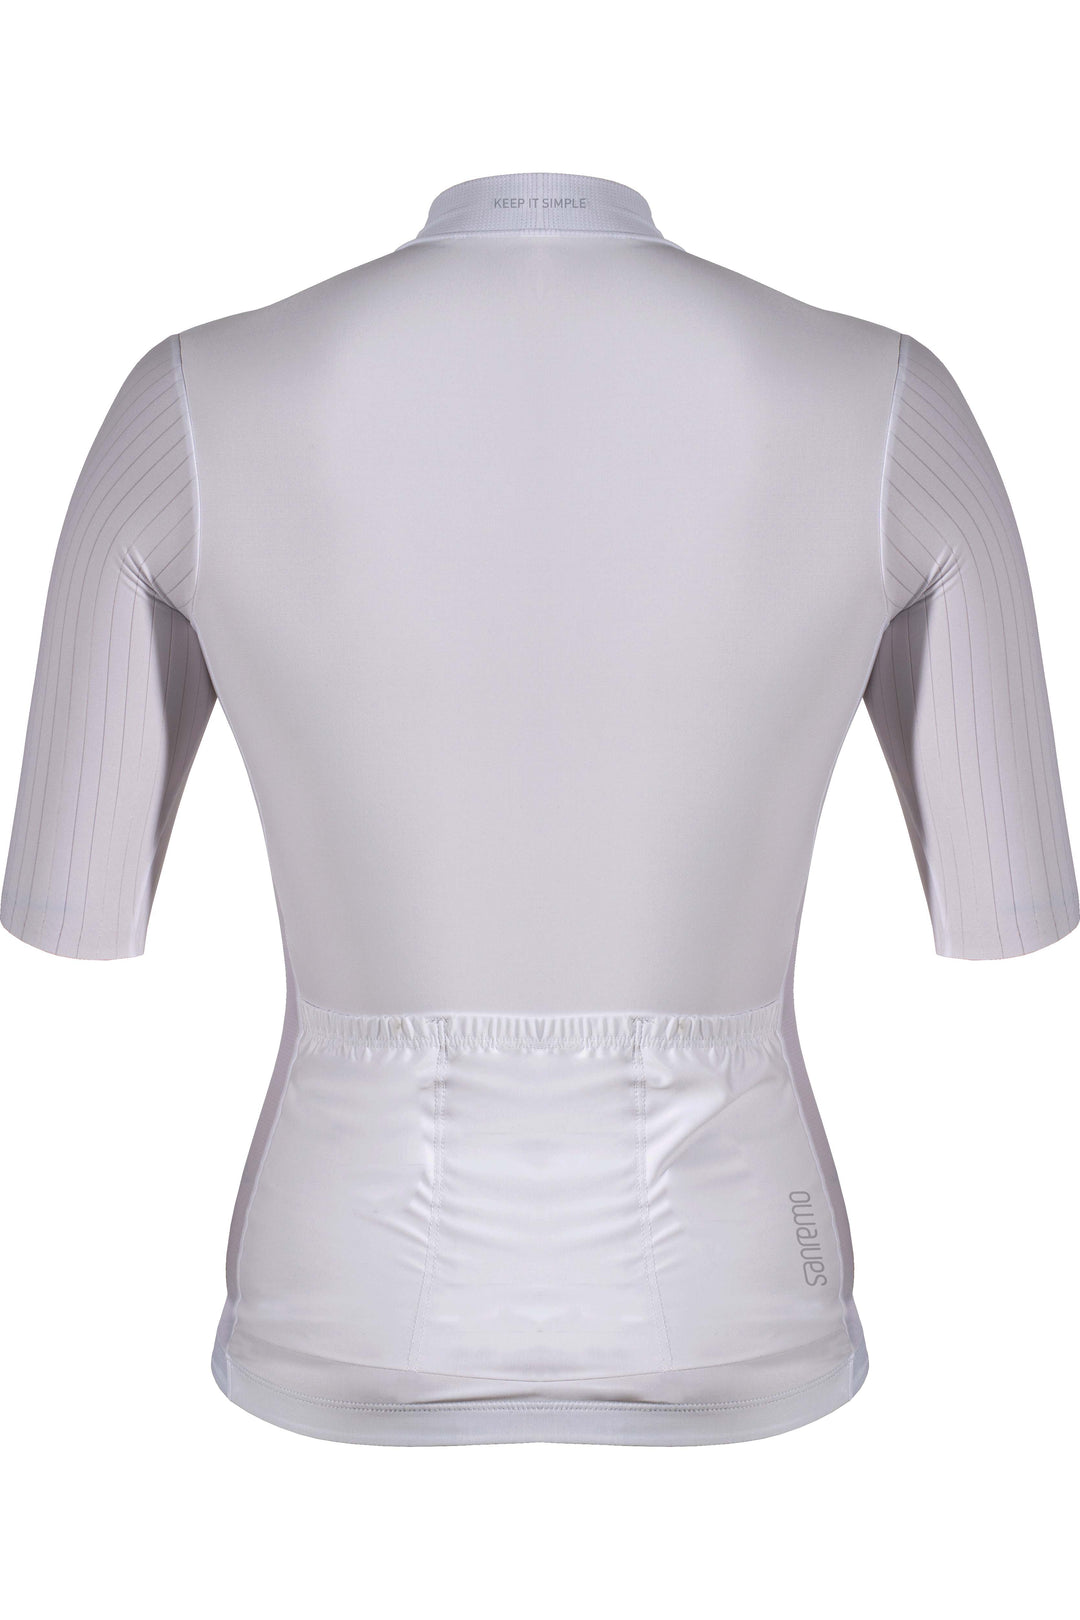 Jersey Corsa WH - Mujer